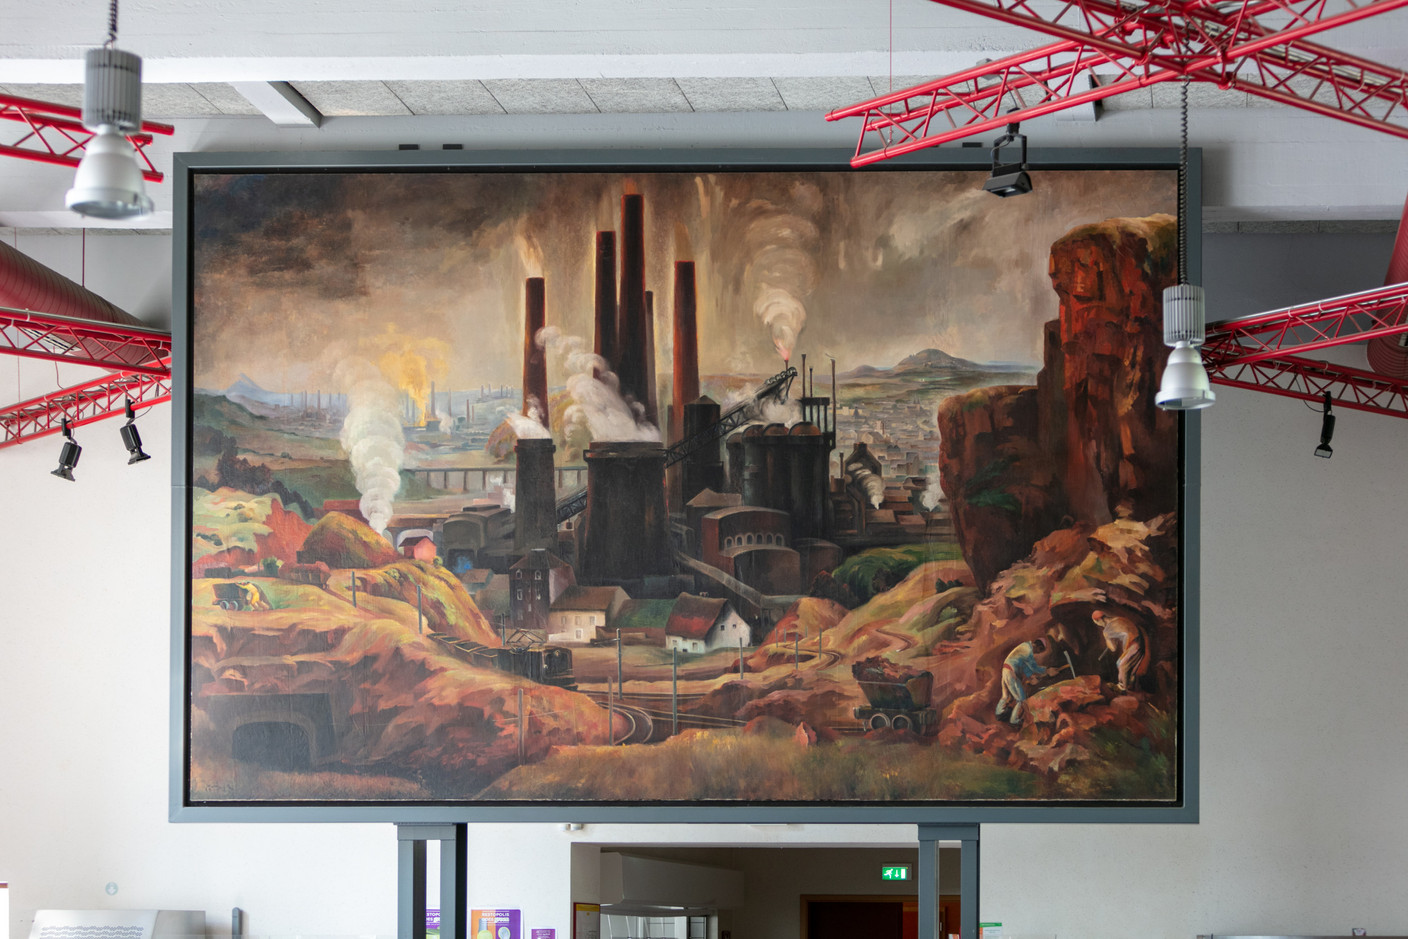 A huge painting by Harry Rabinger hangs in the school’s cafeteria Romain Gamba / Maison Moderne